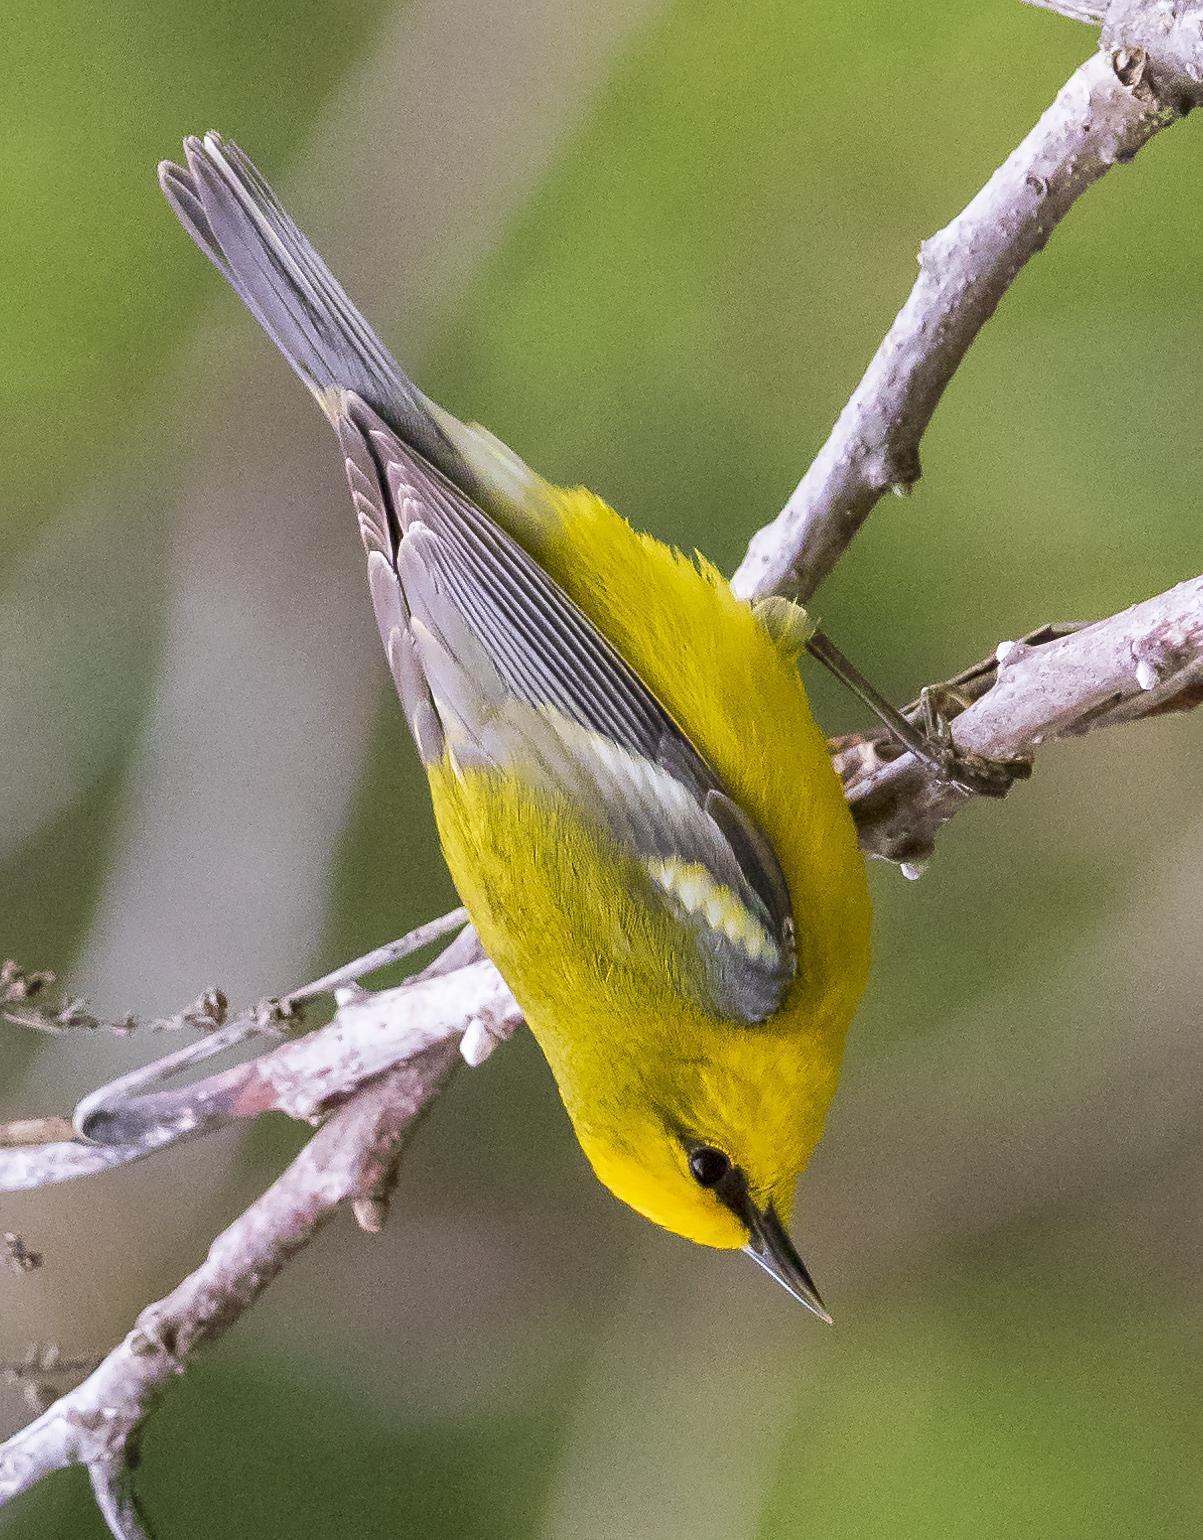 Blue-winged Warbler Photo by Tom Gannon